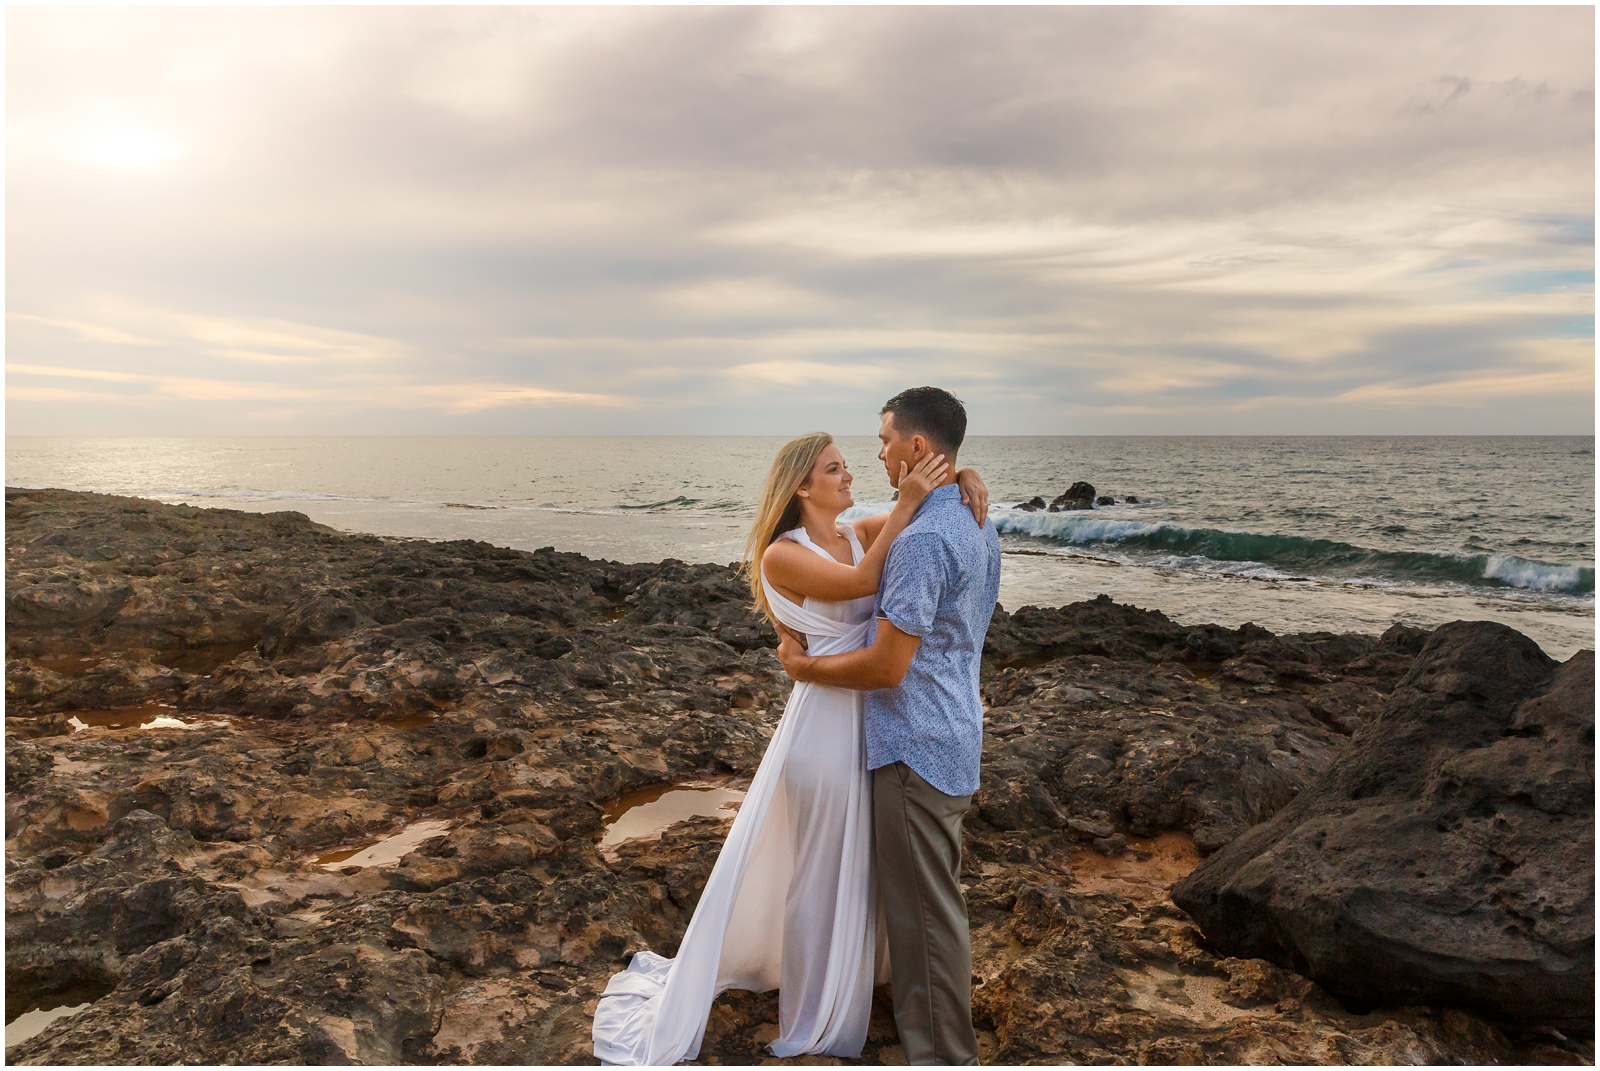 Sunset on the beach during this couple's Oahu elopement